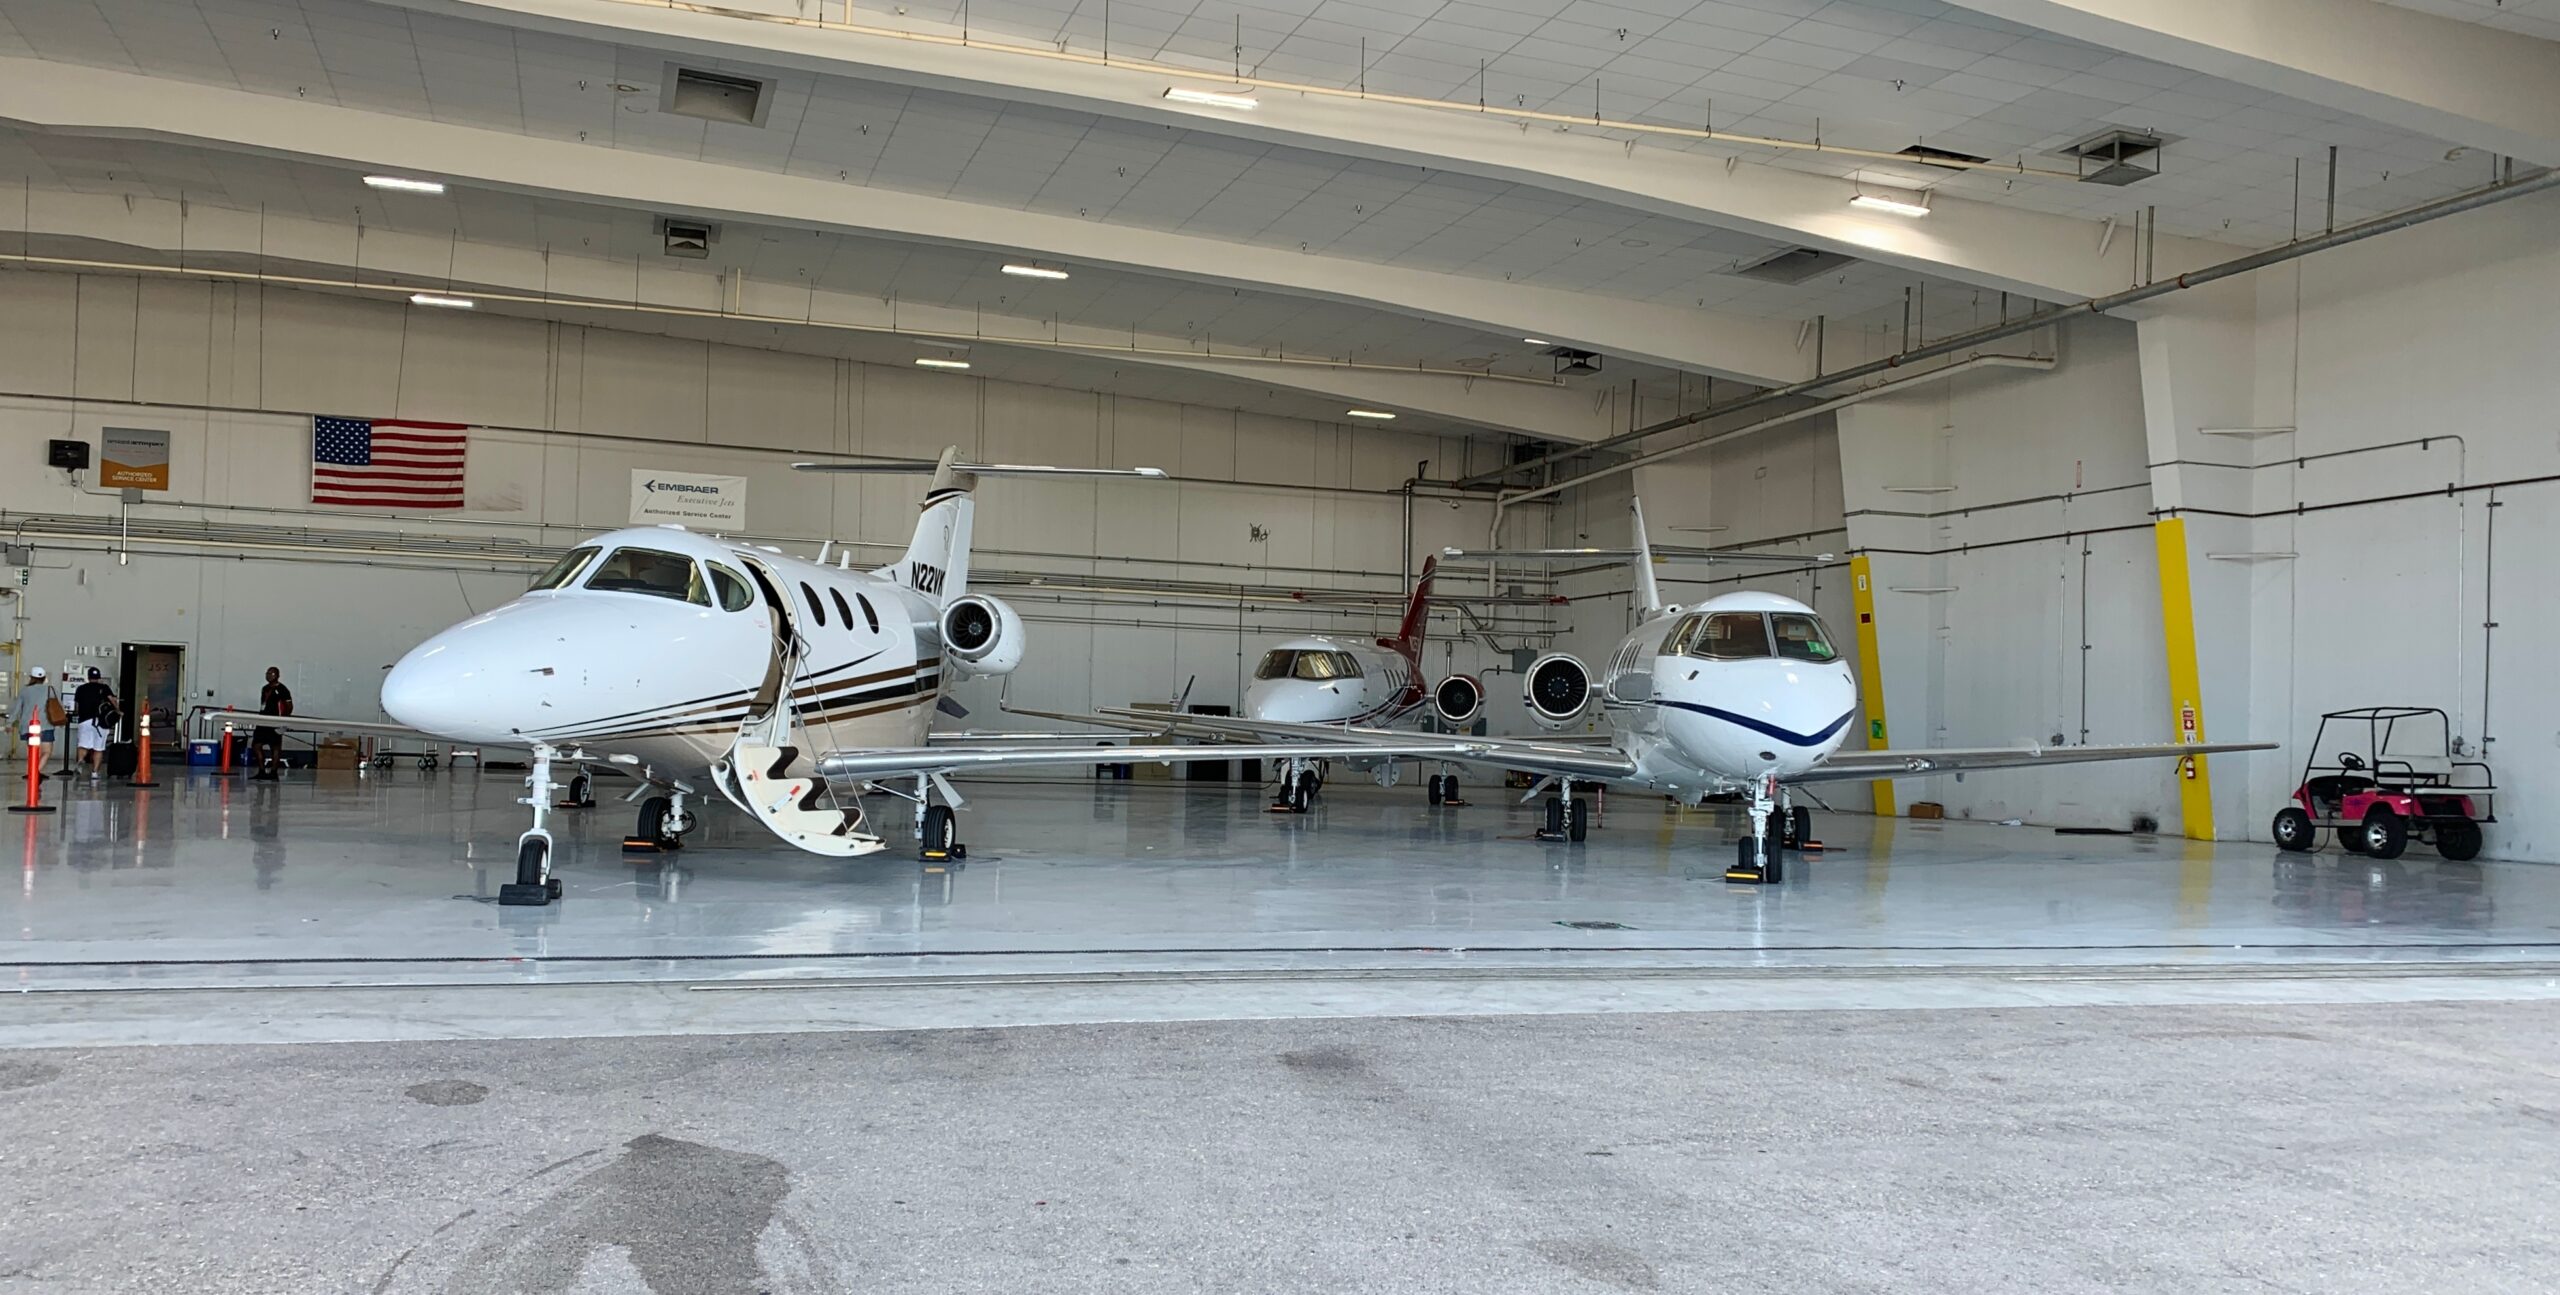 three private jets in an airport hanger